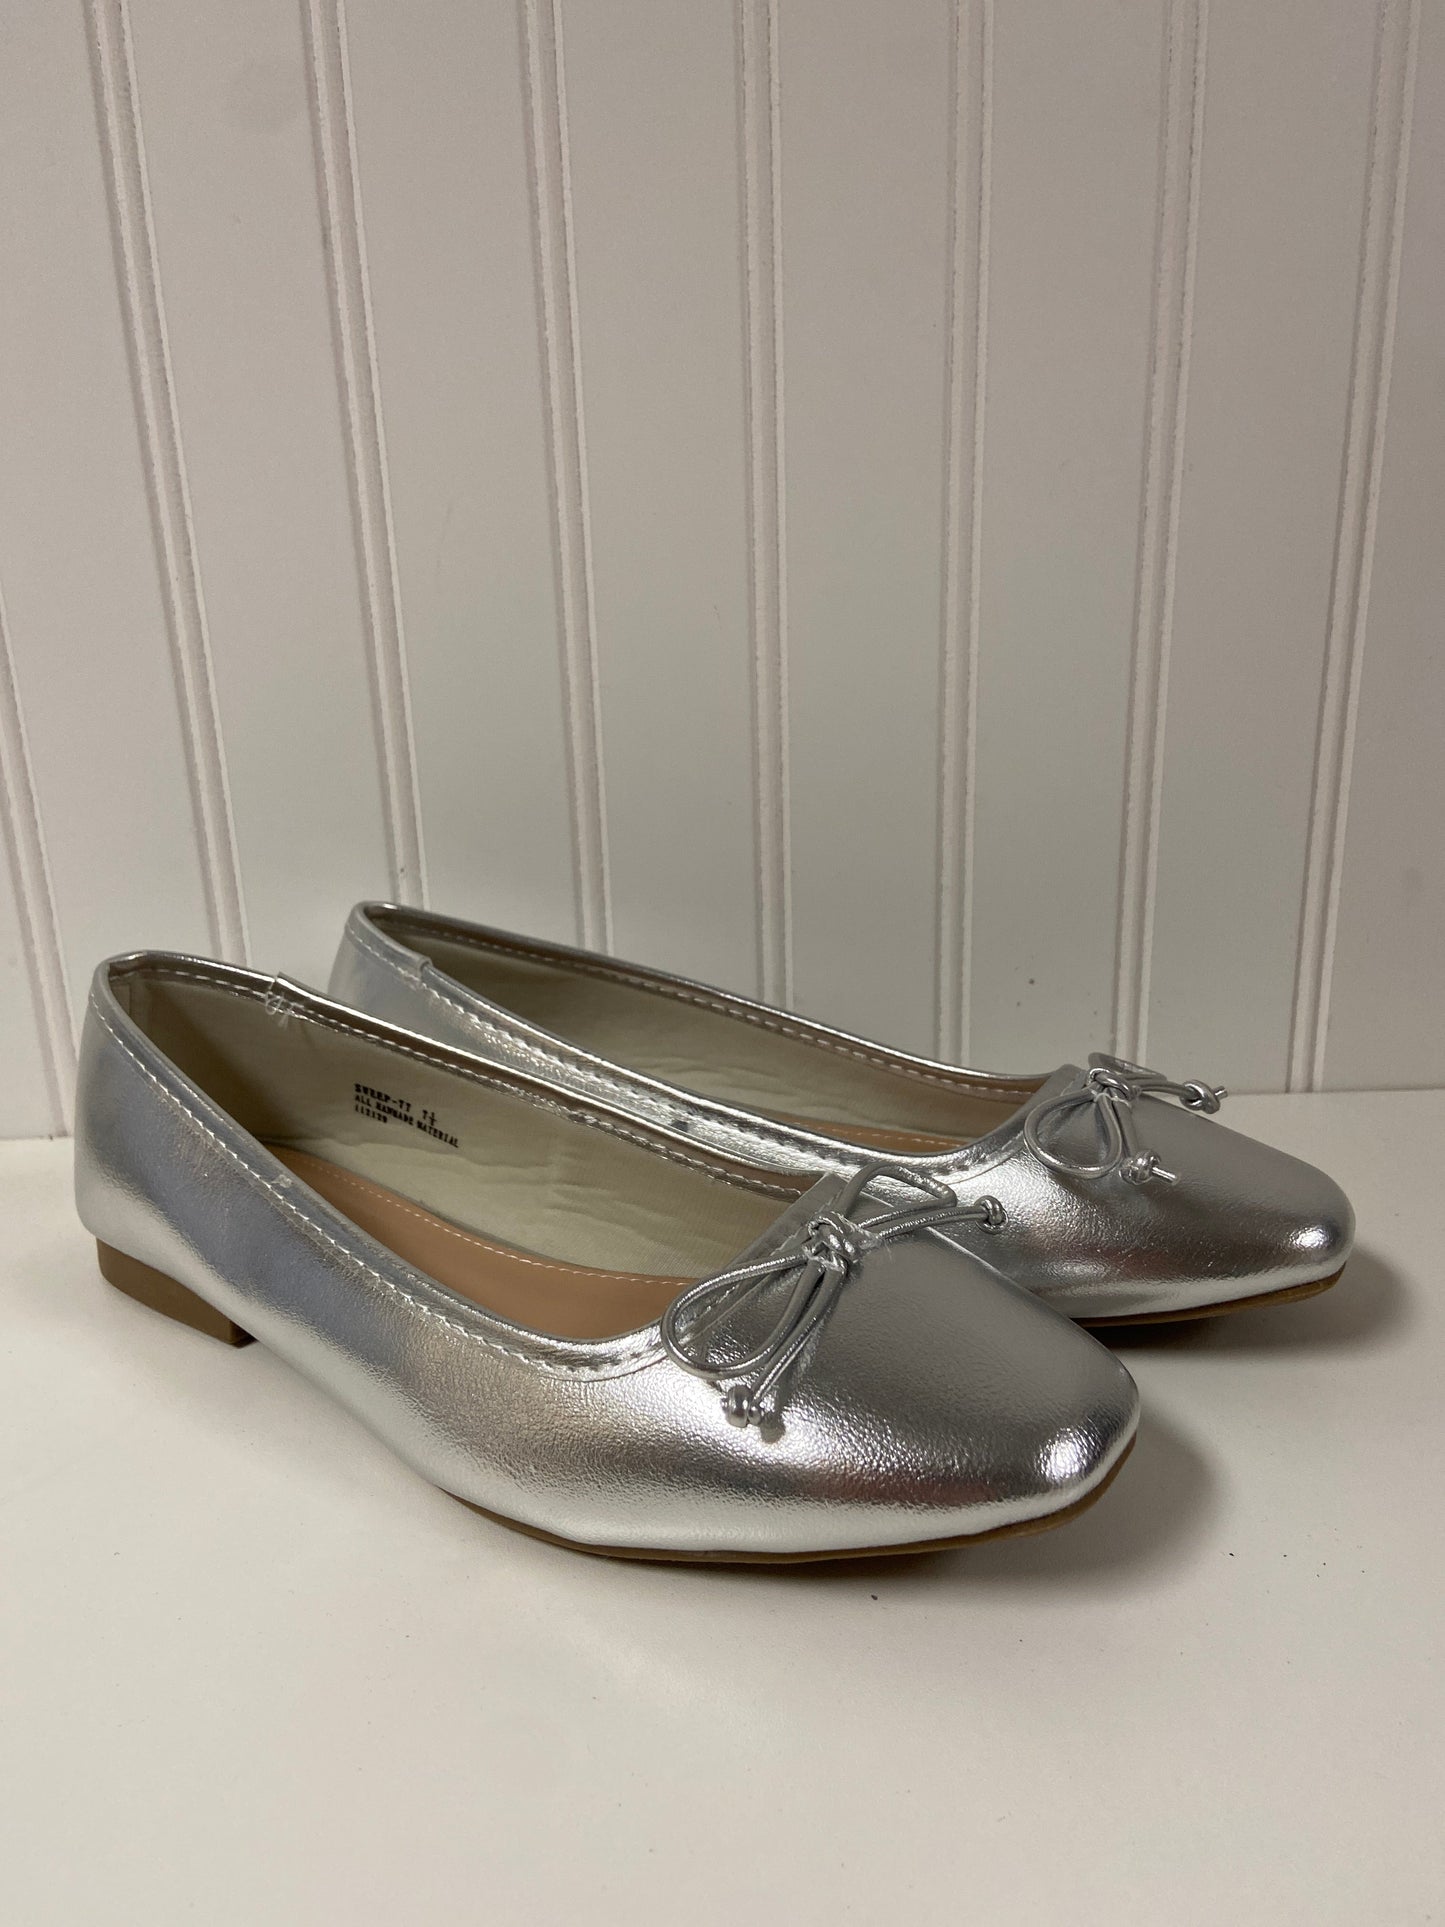 Silver Shoes Flats Bamboo, Size 7.5